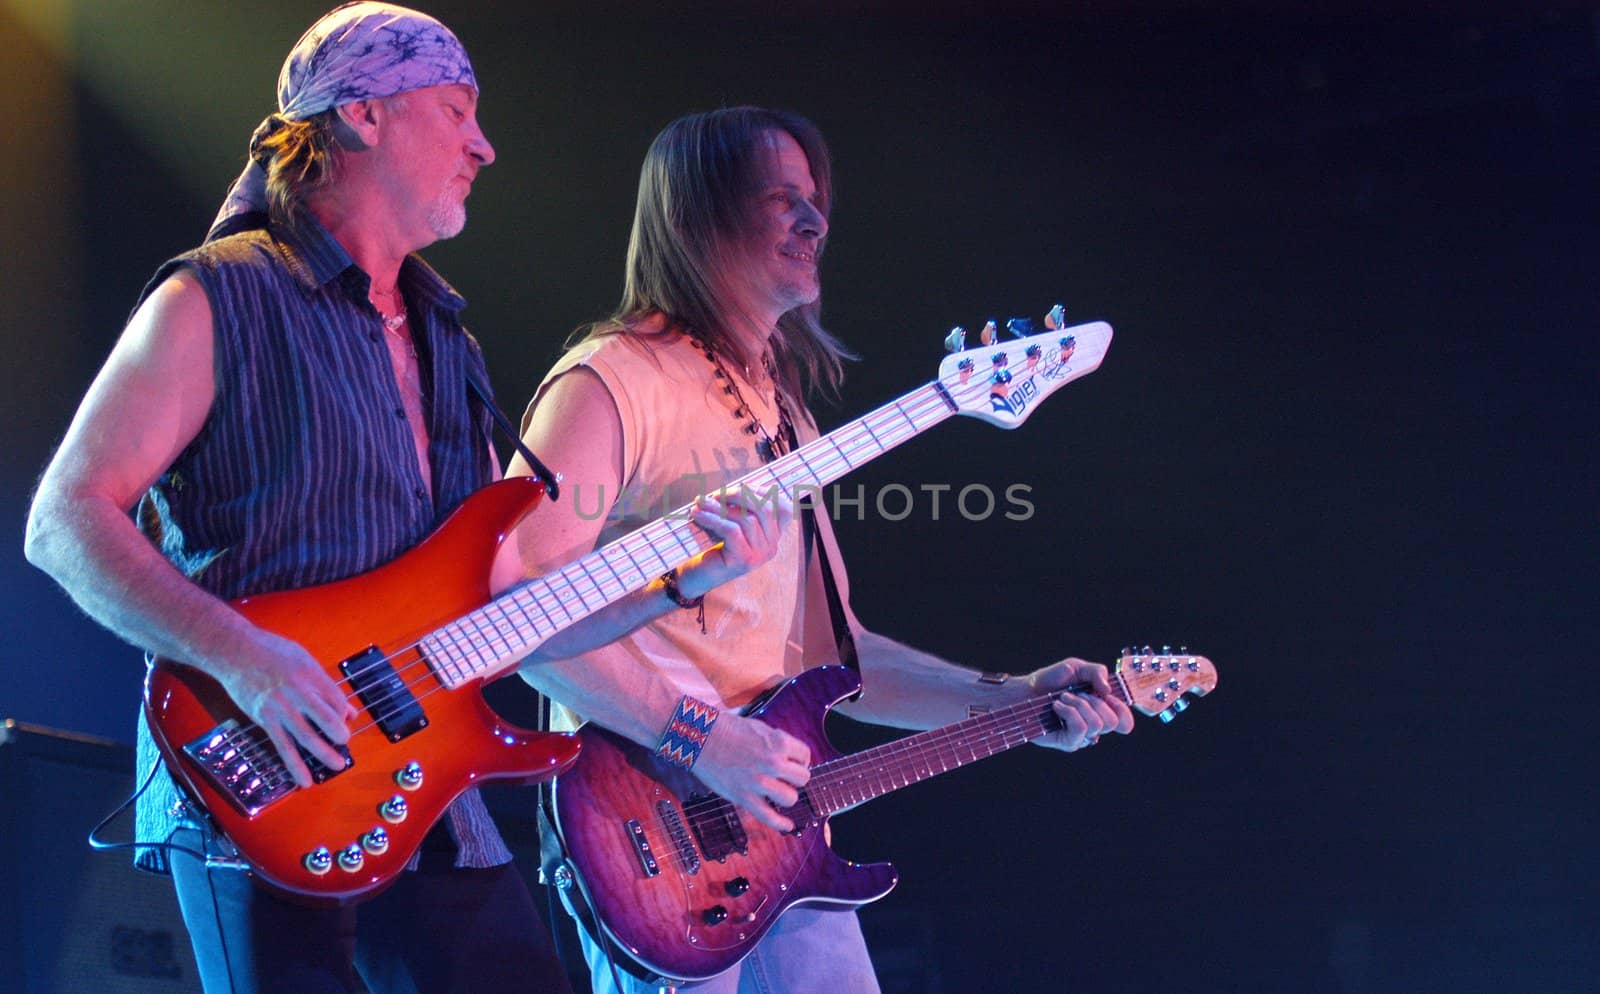 BRNO, CZECH REP., FEBRUARY-22: Steve Morse(R) and  Rodger Glover (L) from British band Deep Purple in performance at the hall Rondo February 22, 2006 in Brno, Czech Republic. The group arrived as part of tour for the new album Rapture Of The Deep.